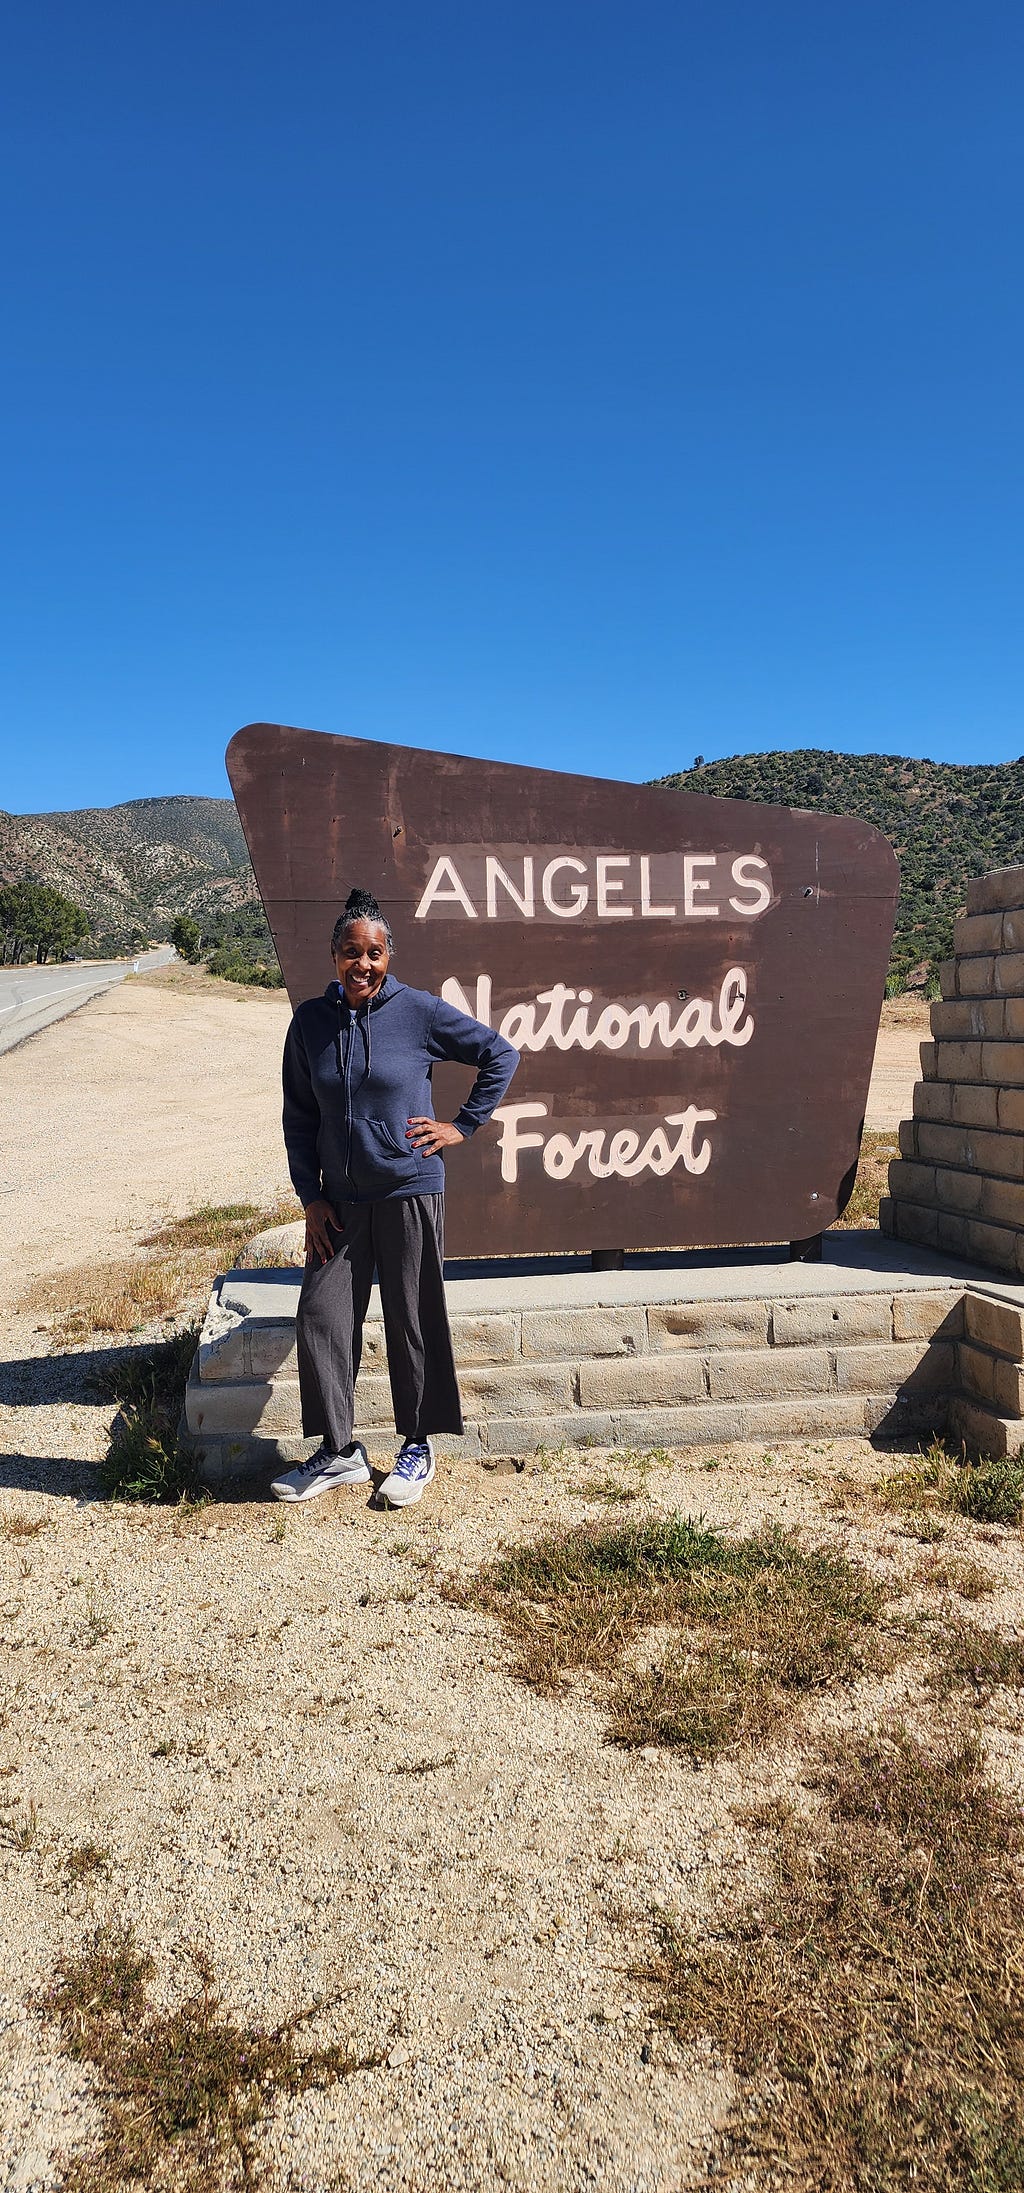 My mother outside the Angeles National Forest